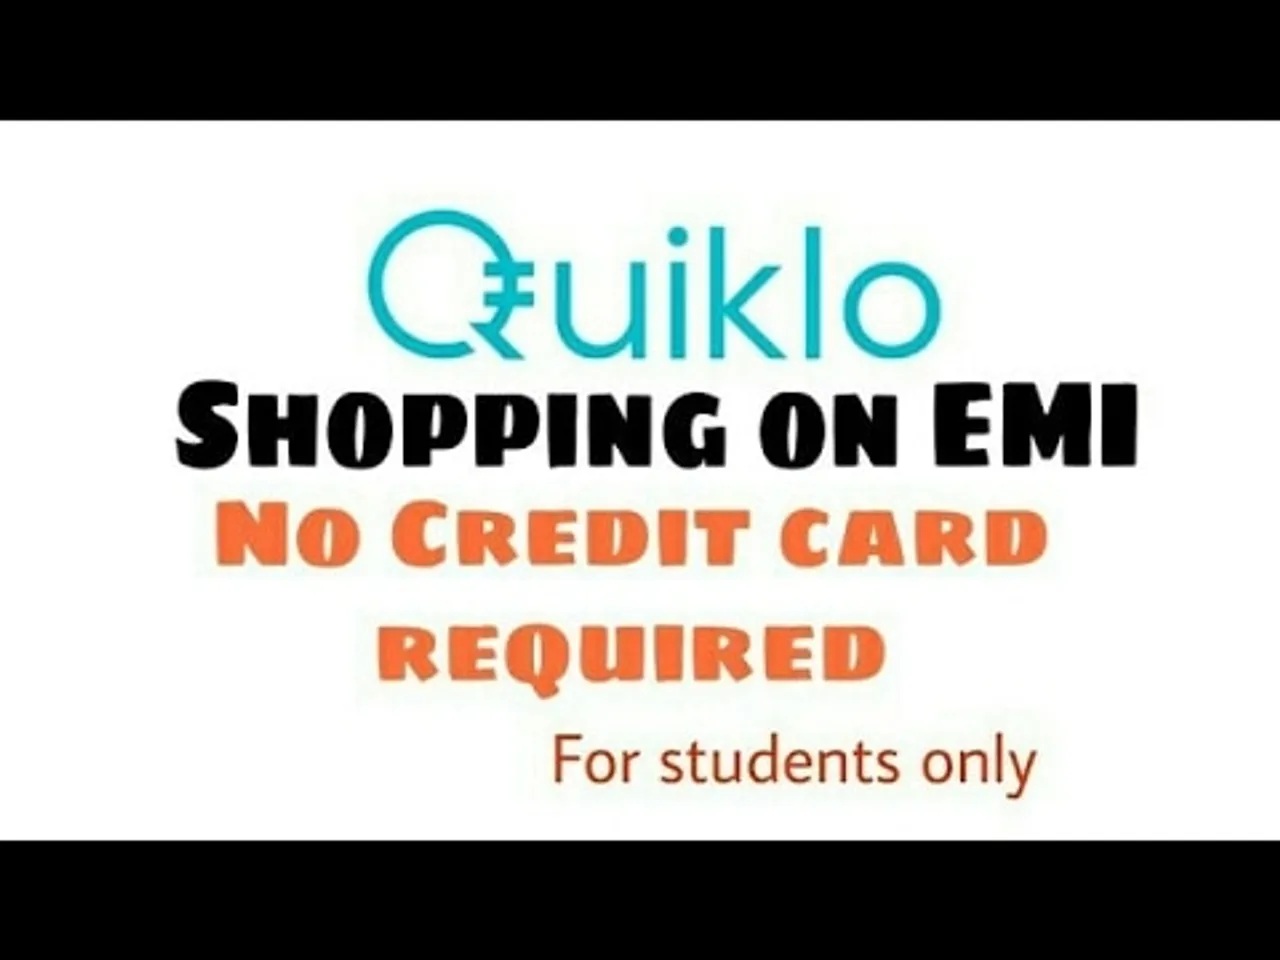 Quiklo extends digital lending services with education loans launch